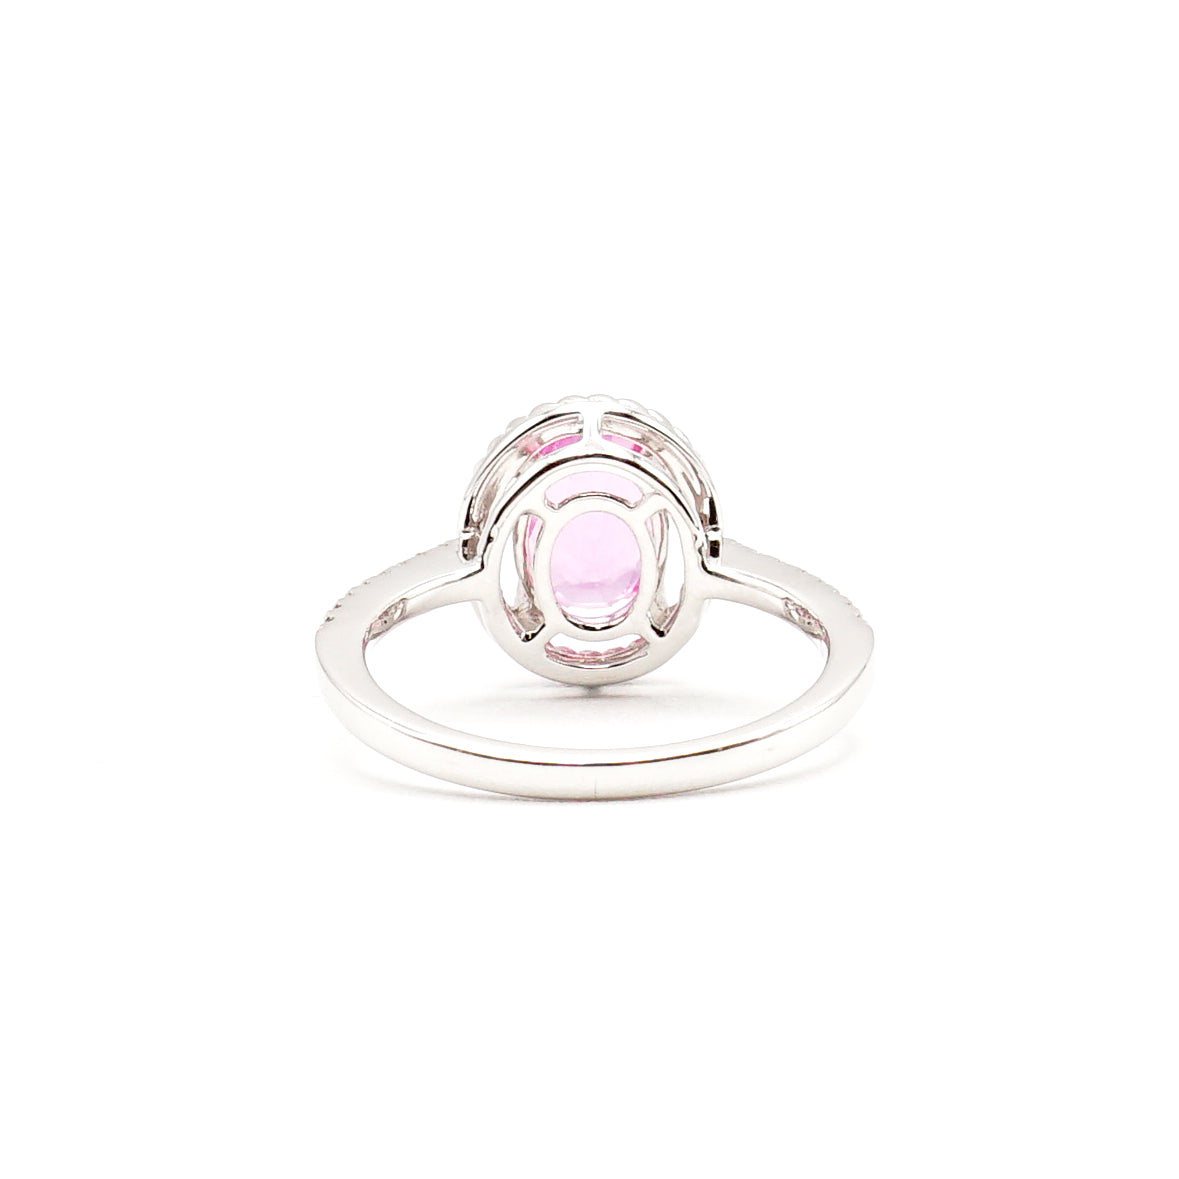 14K White Gold Pink Sappphire and Diamond Ring - Le Vive Jewelry in Riverside